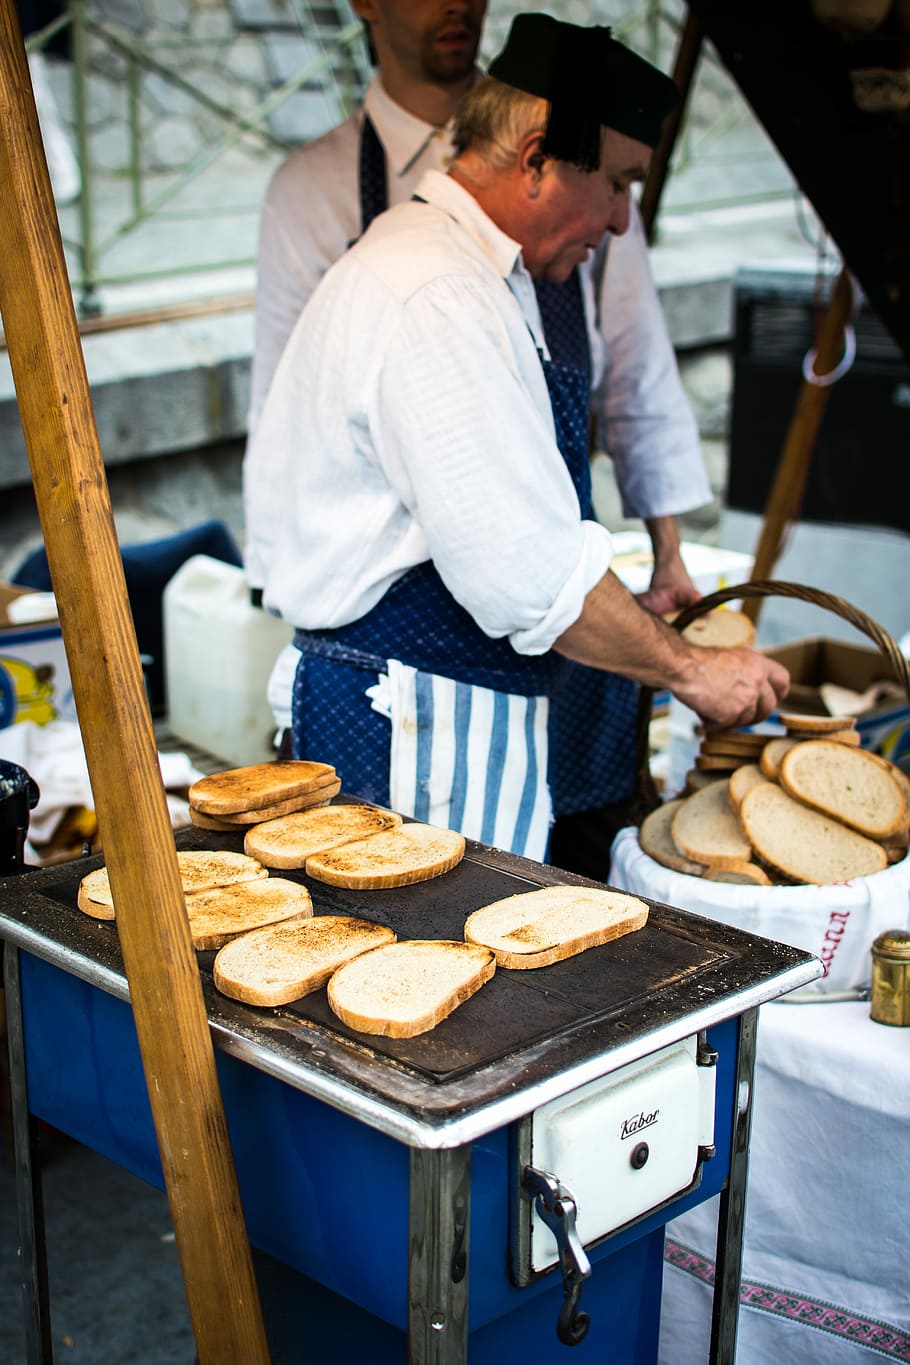 Traditional Czech toasted bread with garlic, hands, market, outside